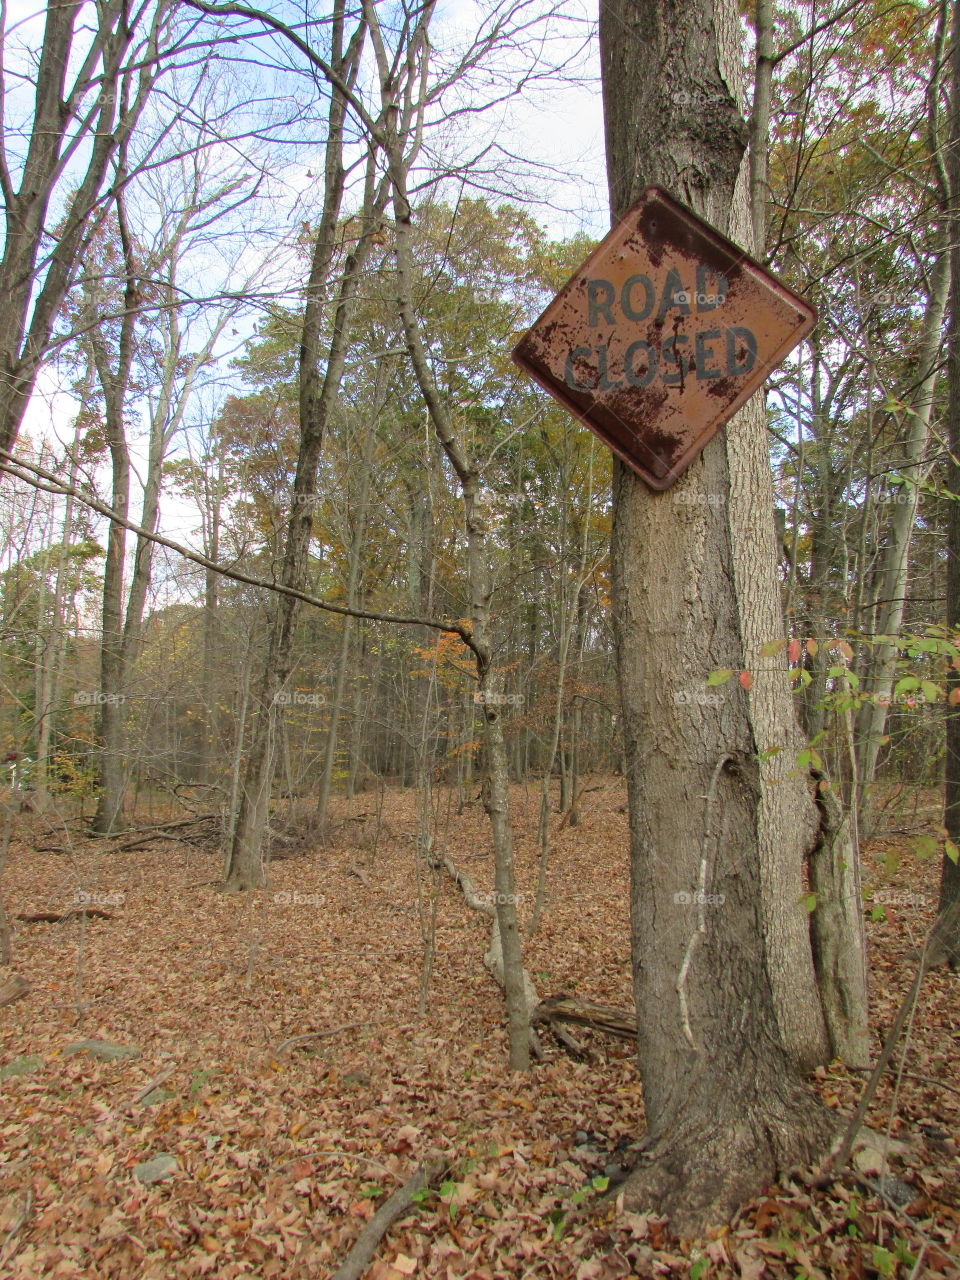 Creepy rusted road closed sign in the middle of the woods